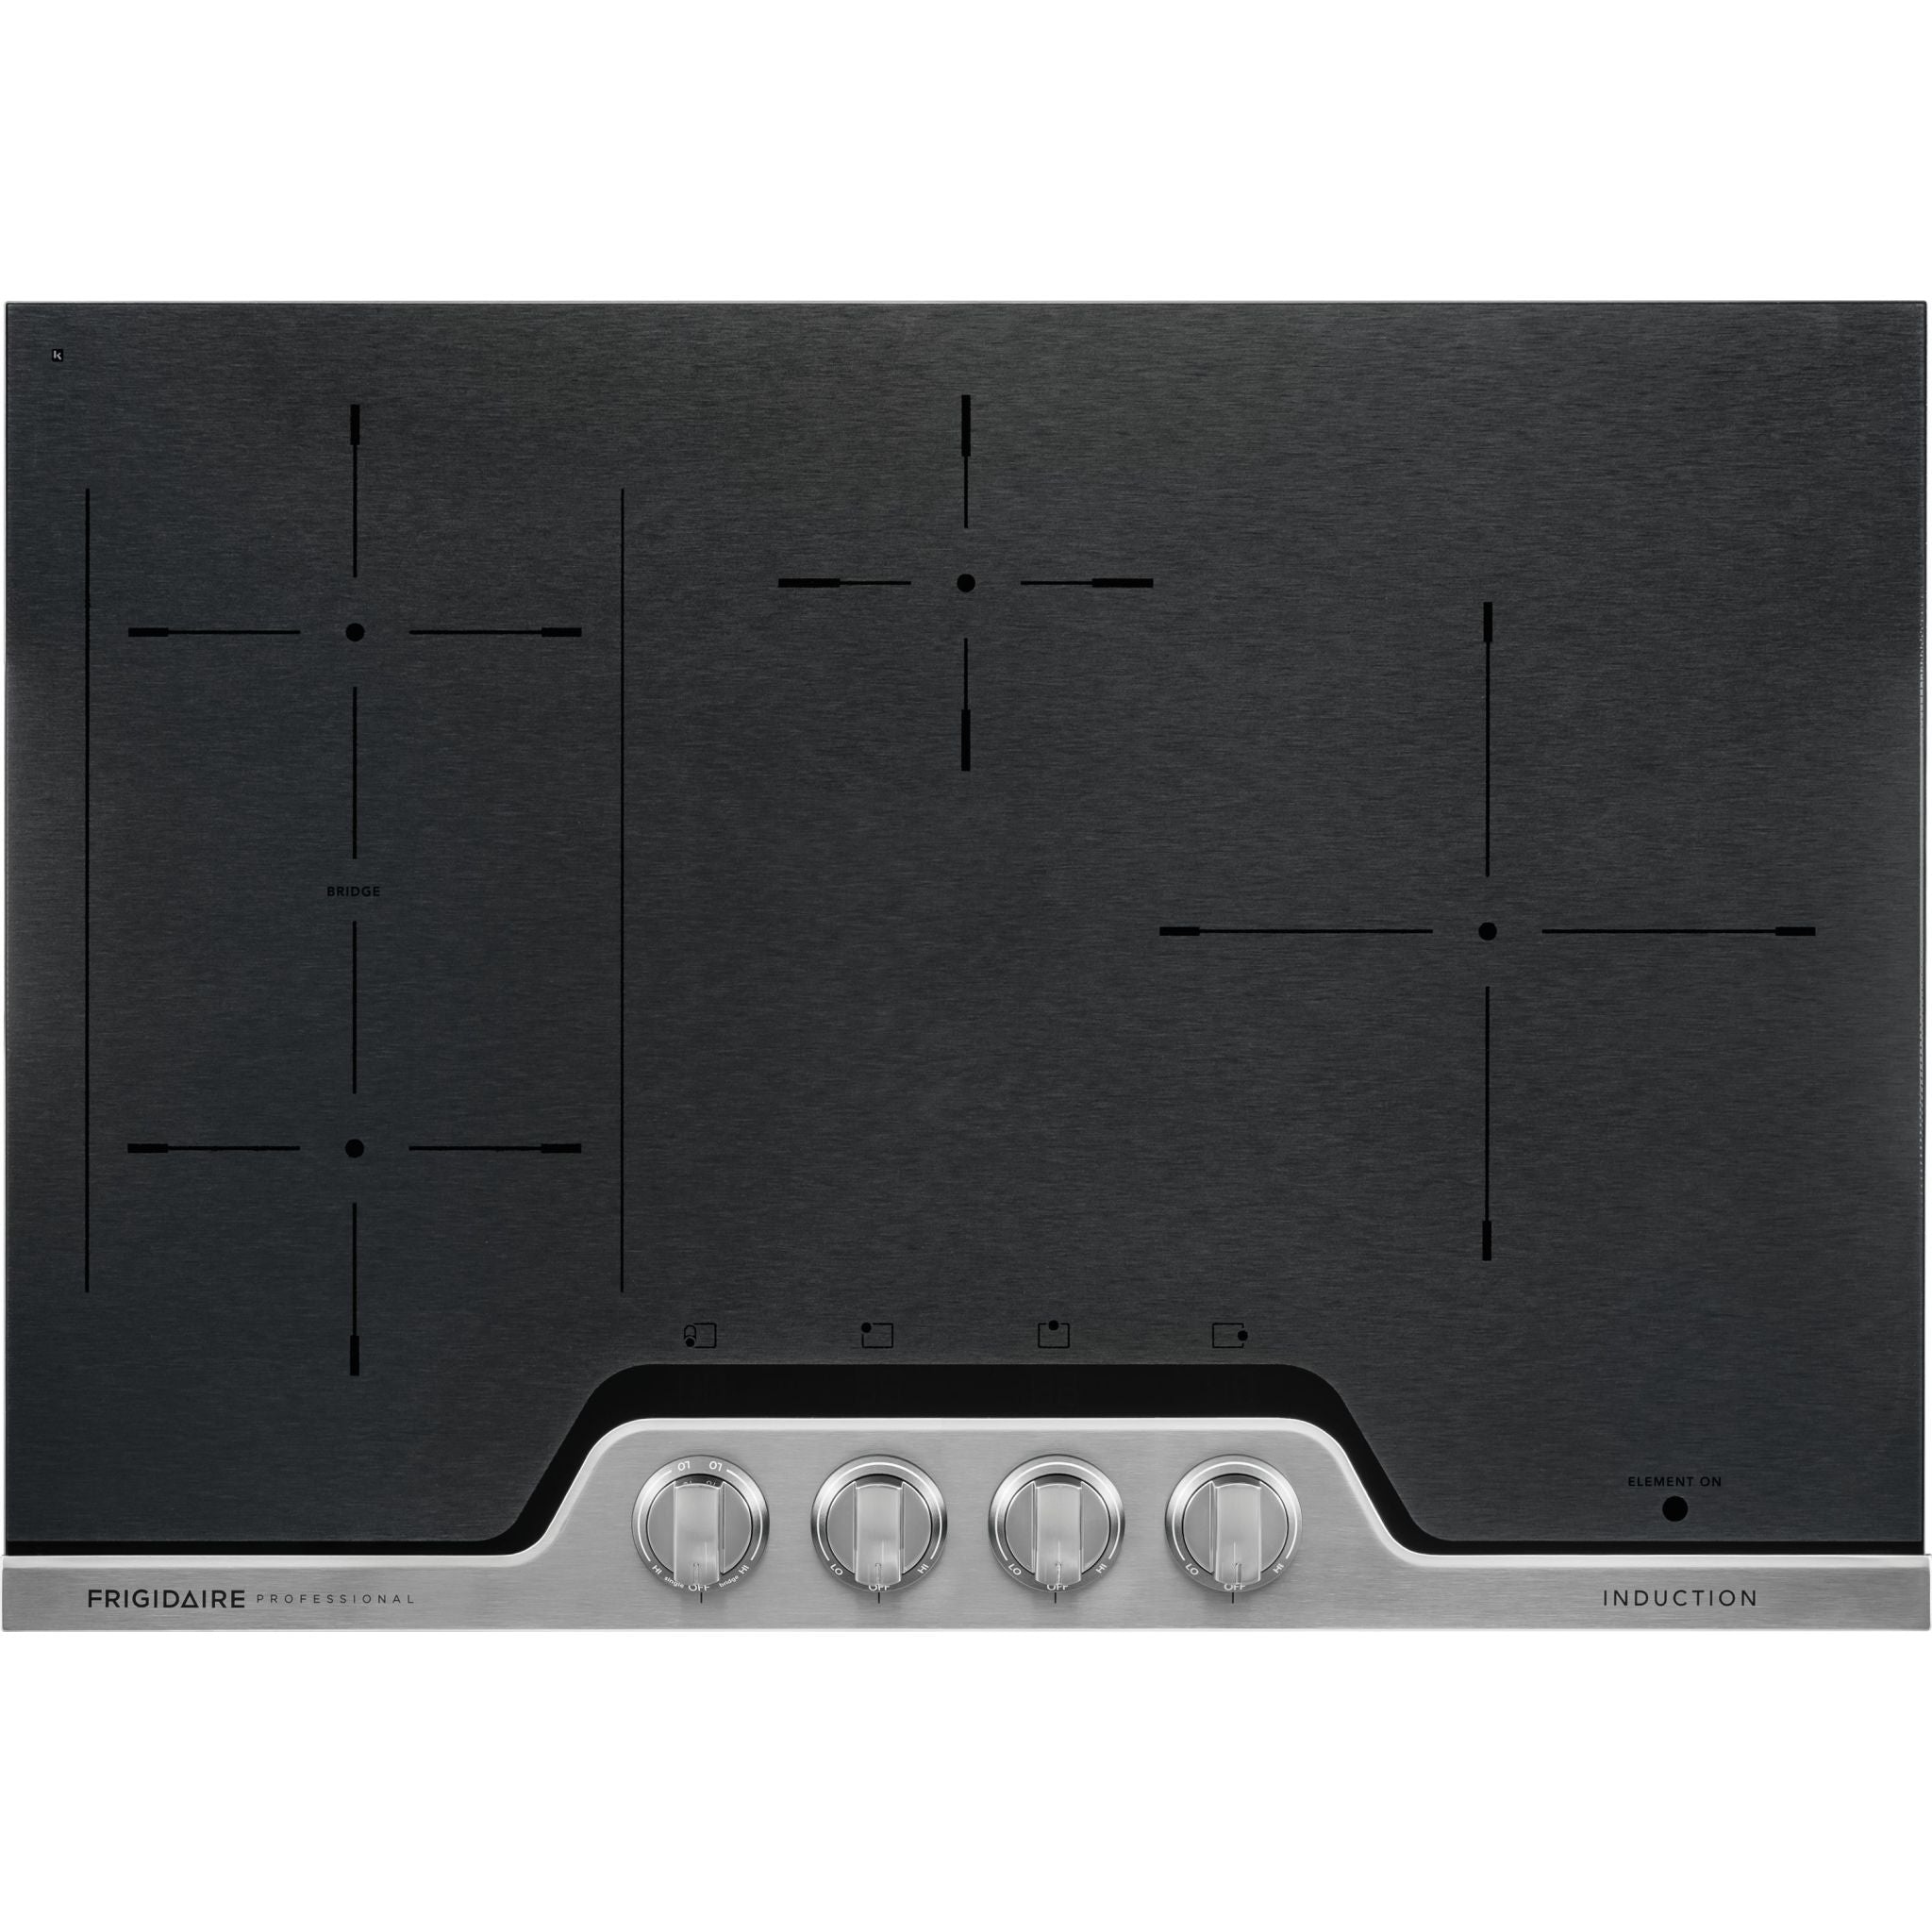 Frigidaire Professional, Frigidaire Professional 30" Induction Cooktop (FPIC3077RF) - Stainless Steel